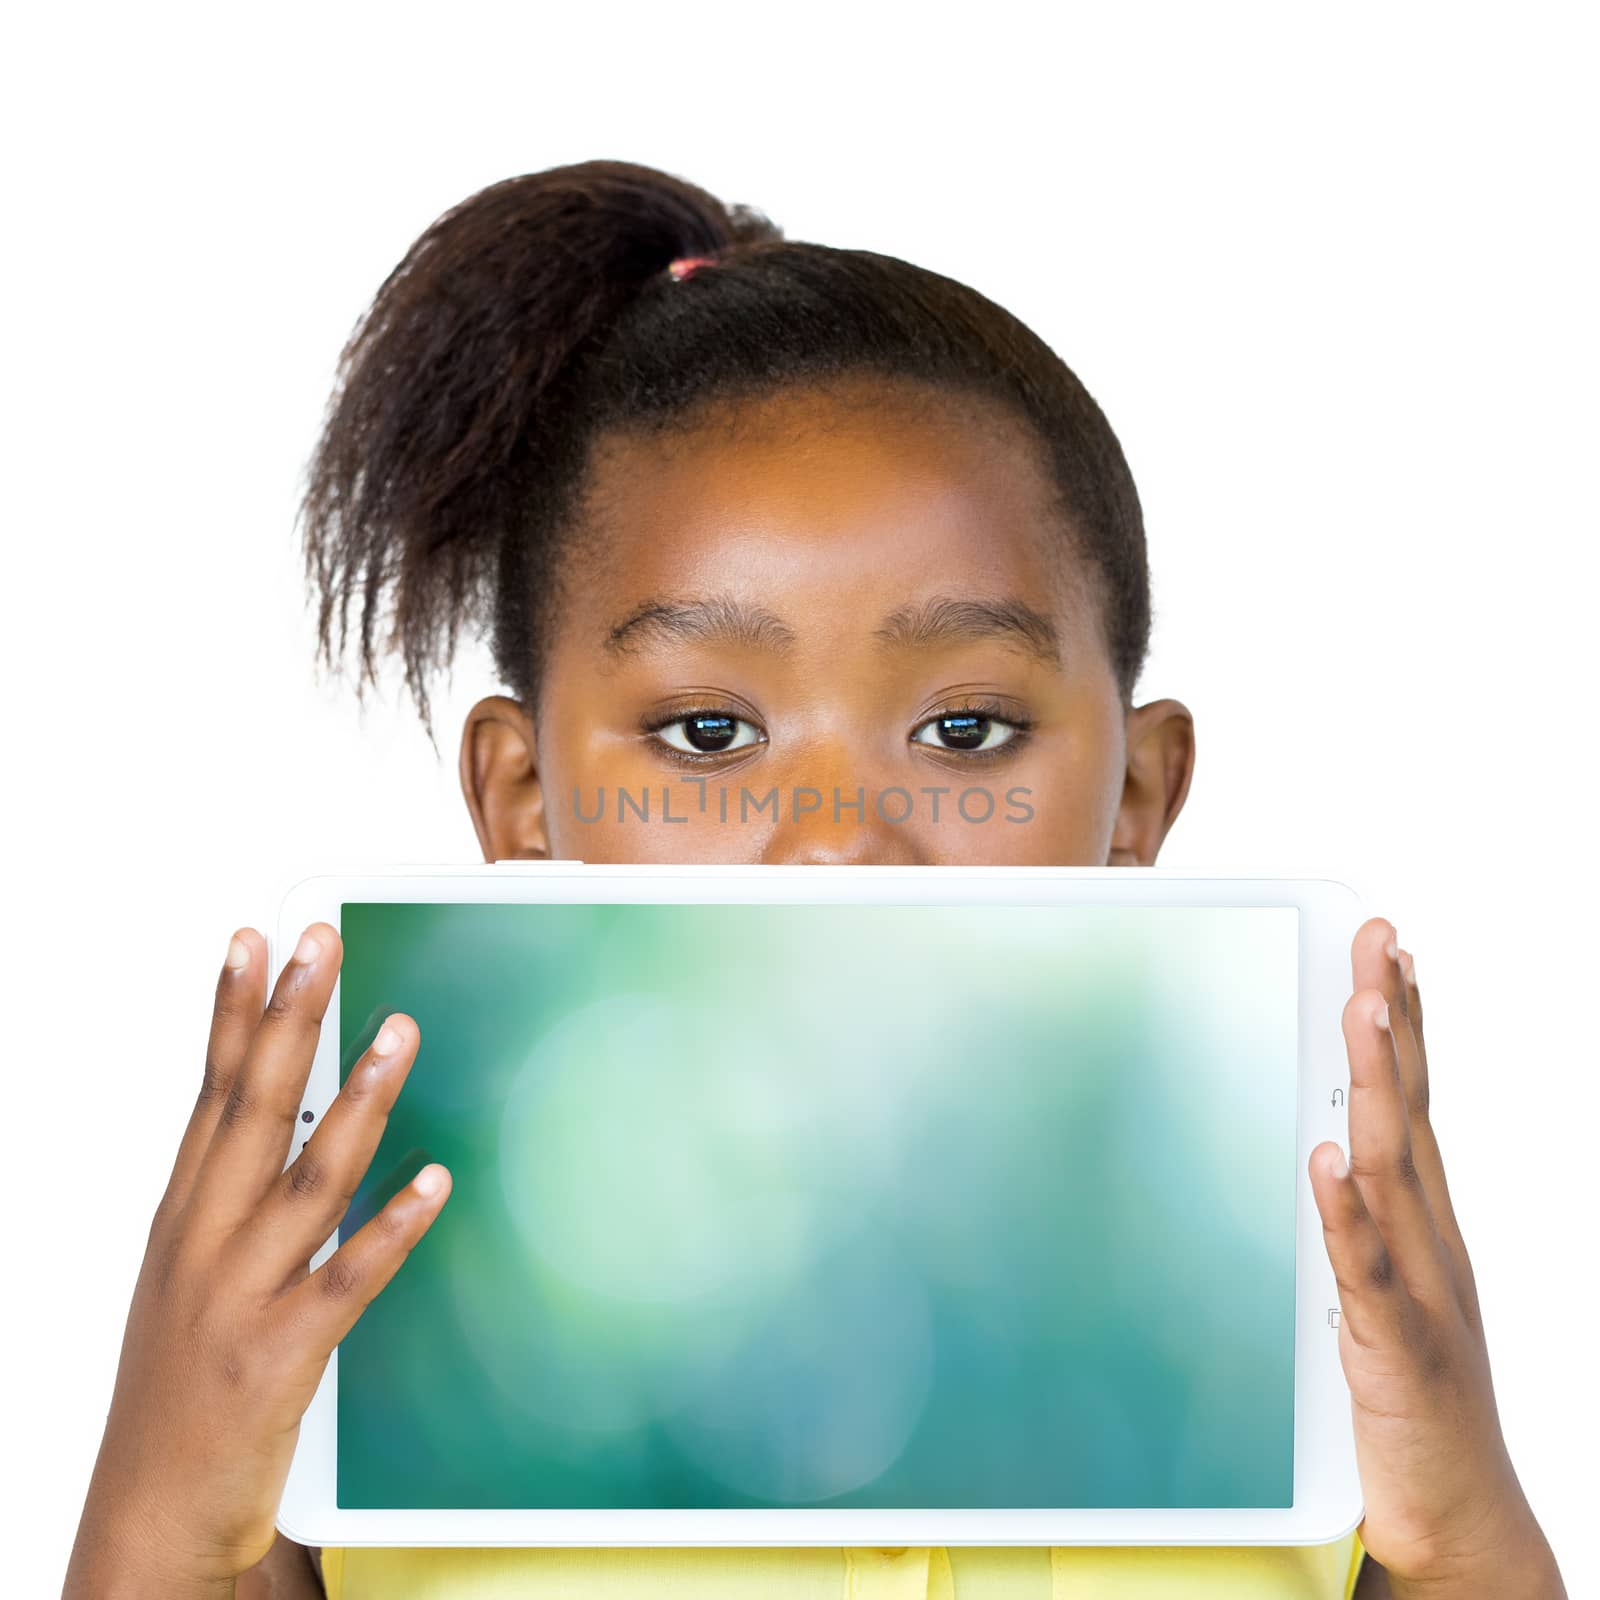 Close up fun portrait of cute little african girl with ponytail peeking behind digital tablet. Kid holding and showing blank digital screen.